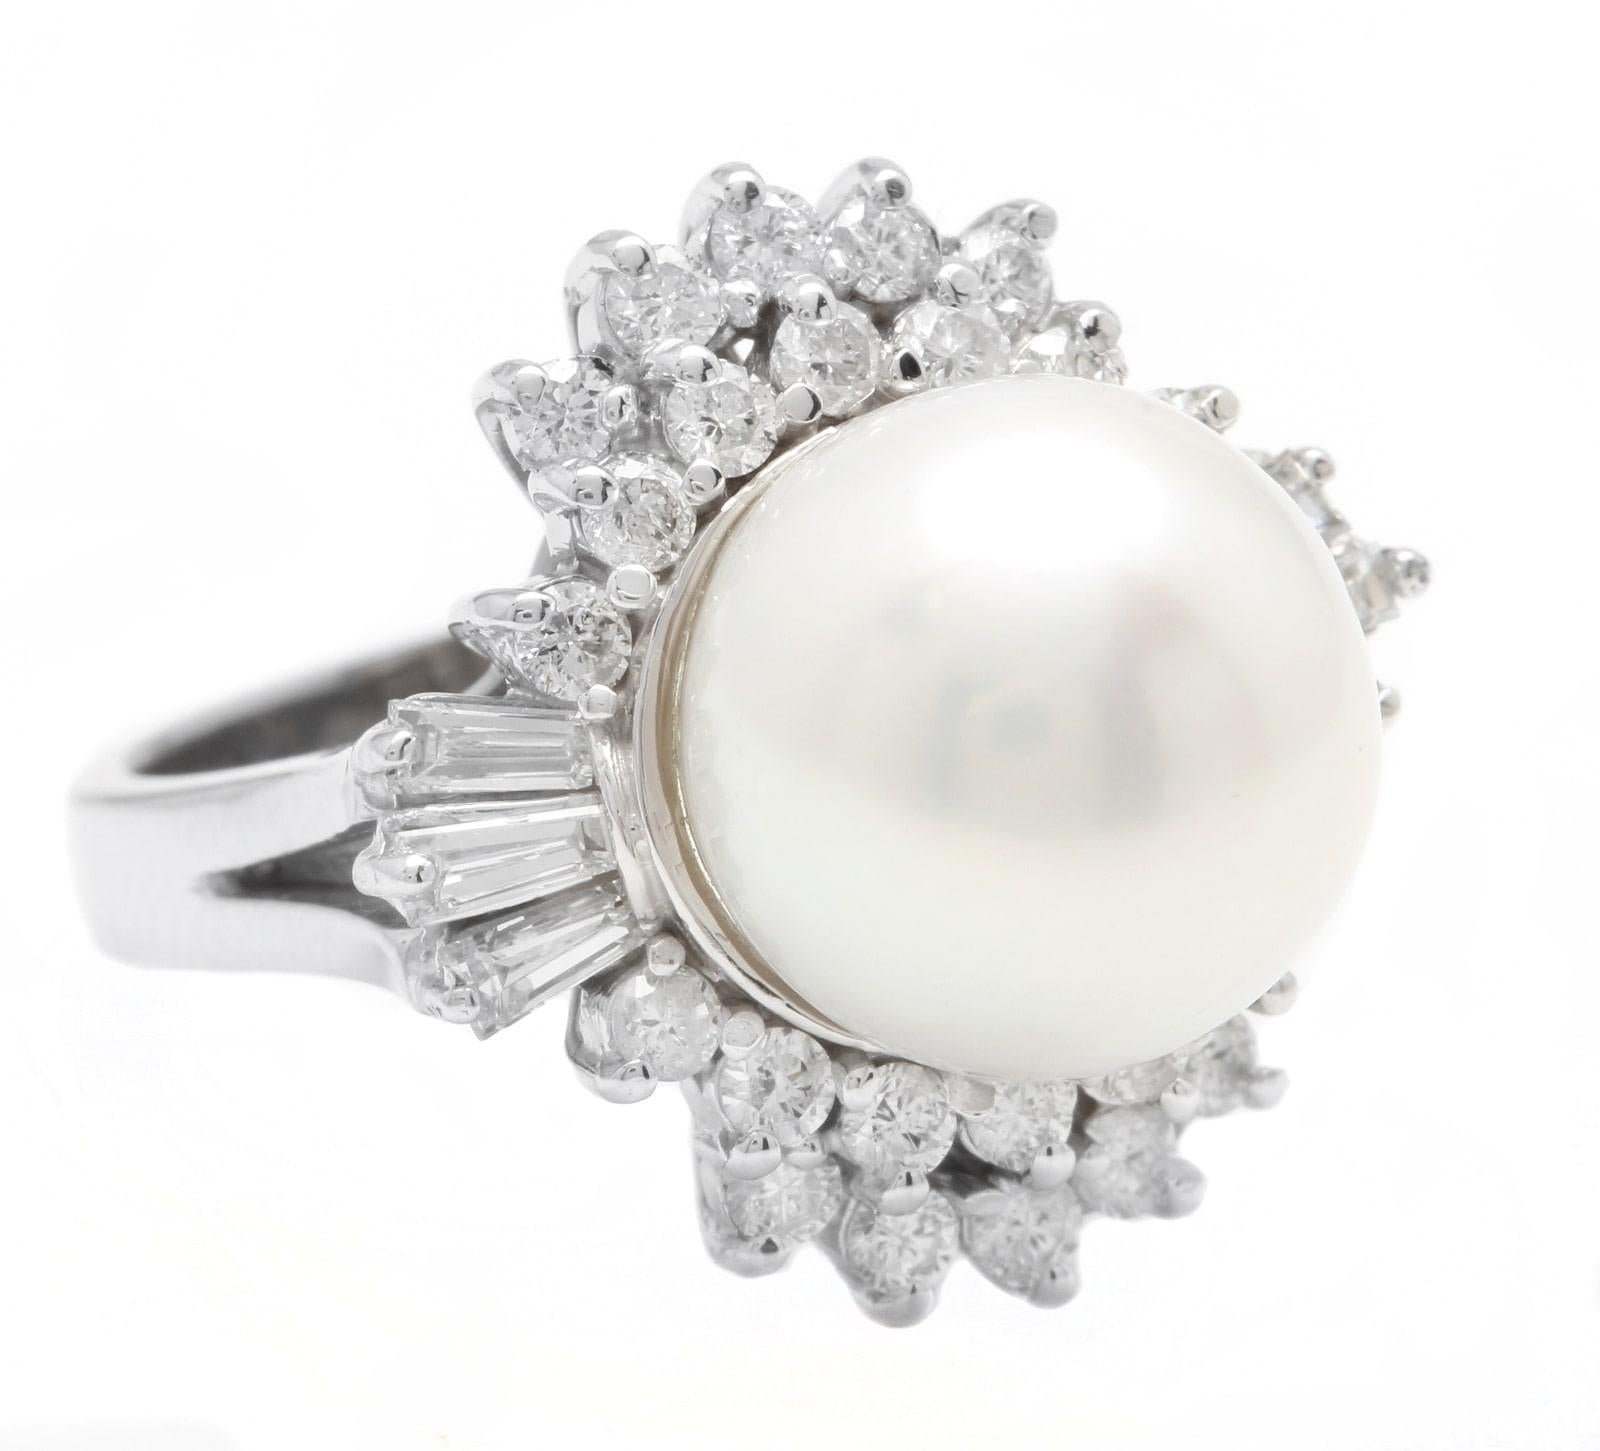 Splendid Natural 13mm Cultured Pearl and Diamond 14K Solid White Gold Ring

Suggested Replacement Value: $7,000.00

Stamped: 14K

Total Natural Pearl Measures: 13mm

Total Natural Round & Marquise Diamonds Weight Approx. 1.30 Carats (color G-H /